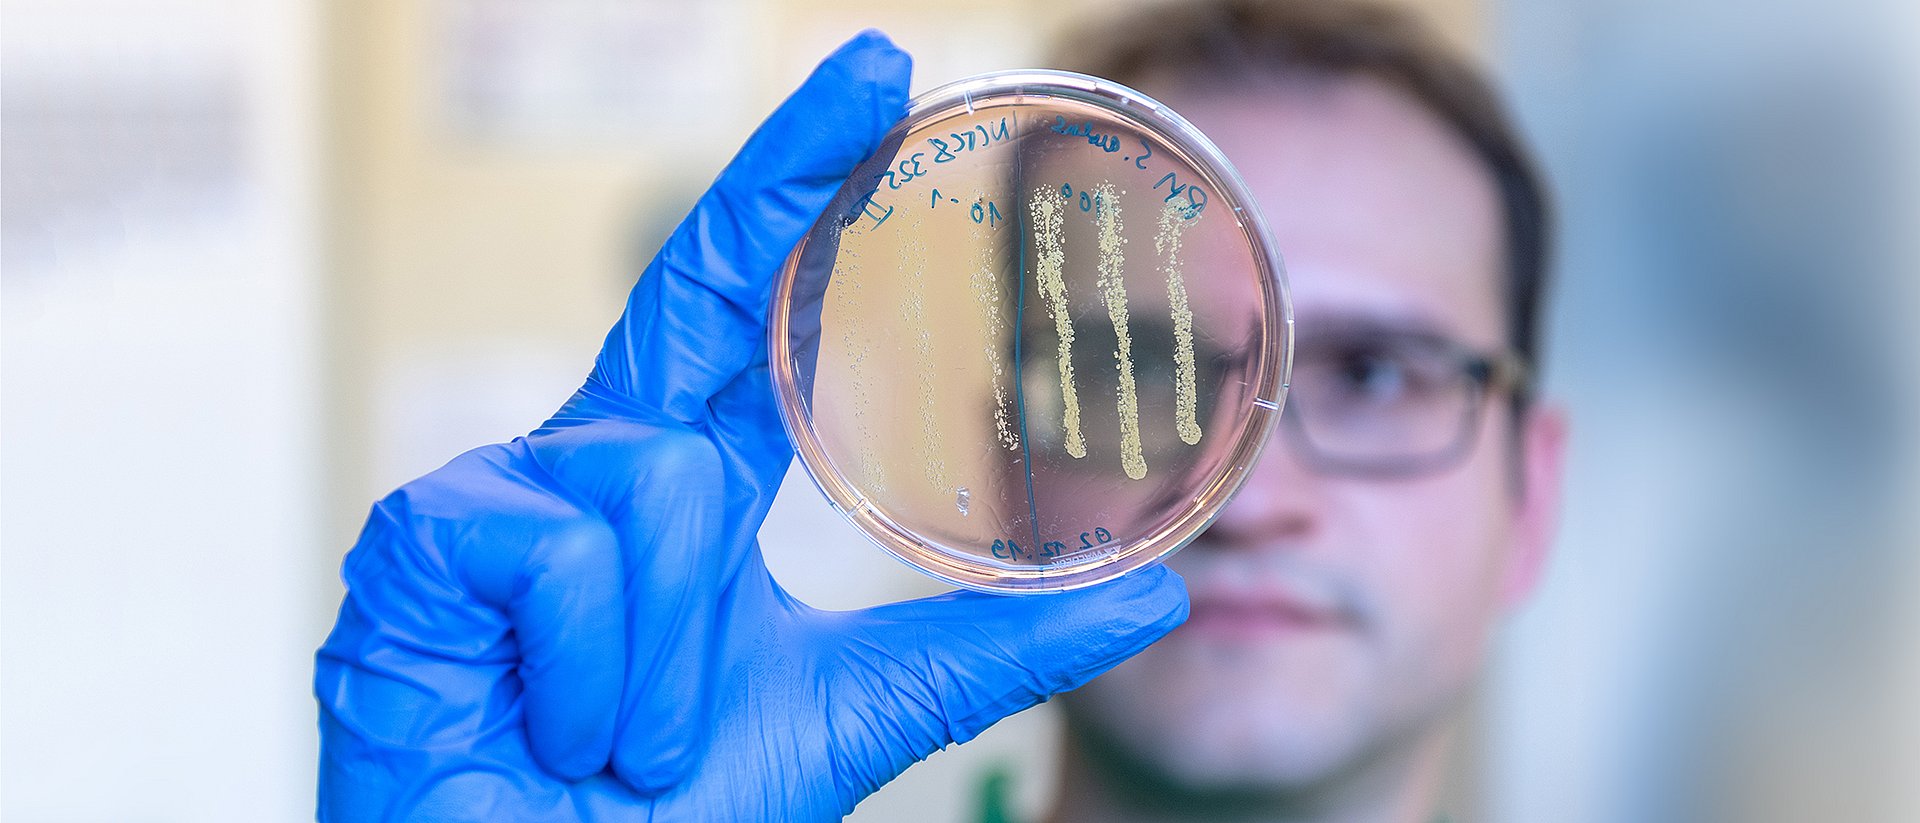 PhD-student Robert Macsics examining an agar plate on which colonies of the Staphylococcus aureus bacteria have grown. The color change of the plate from red to yellow in the area of the bacterial colonies indicates that they are bacteria of the species S. aureus.